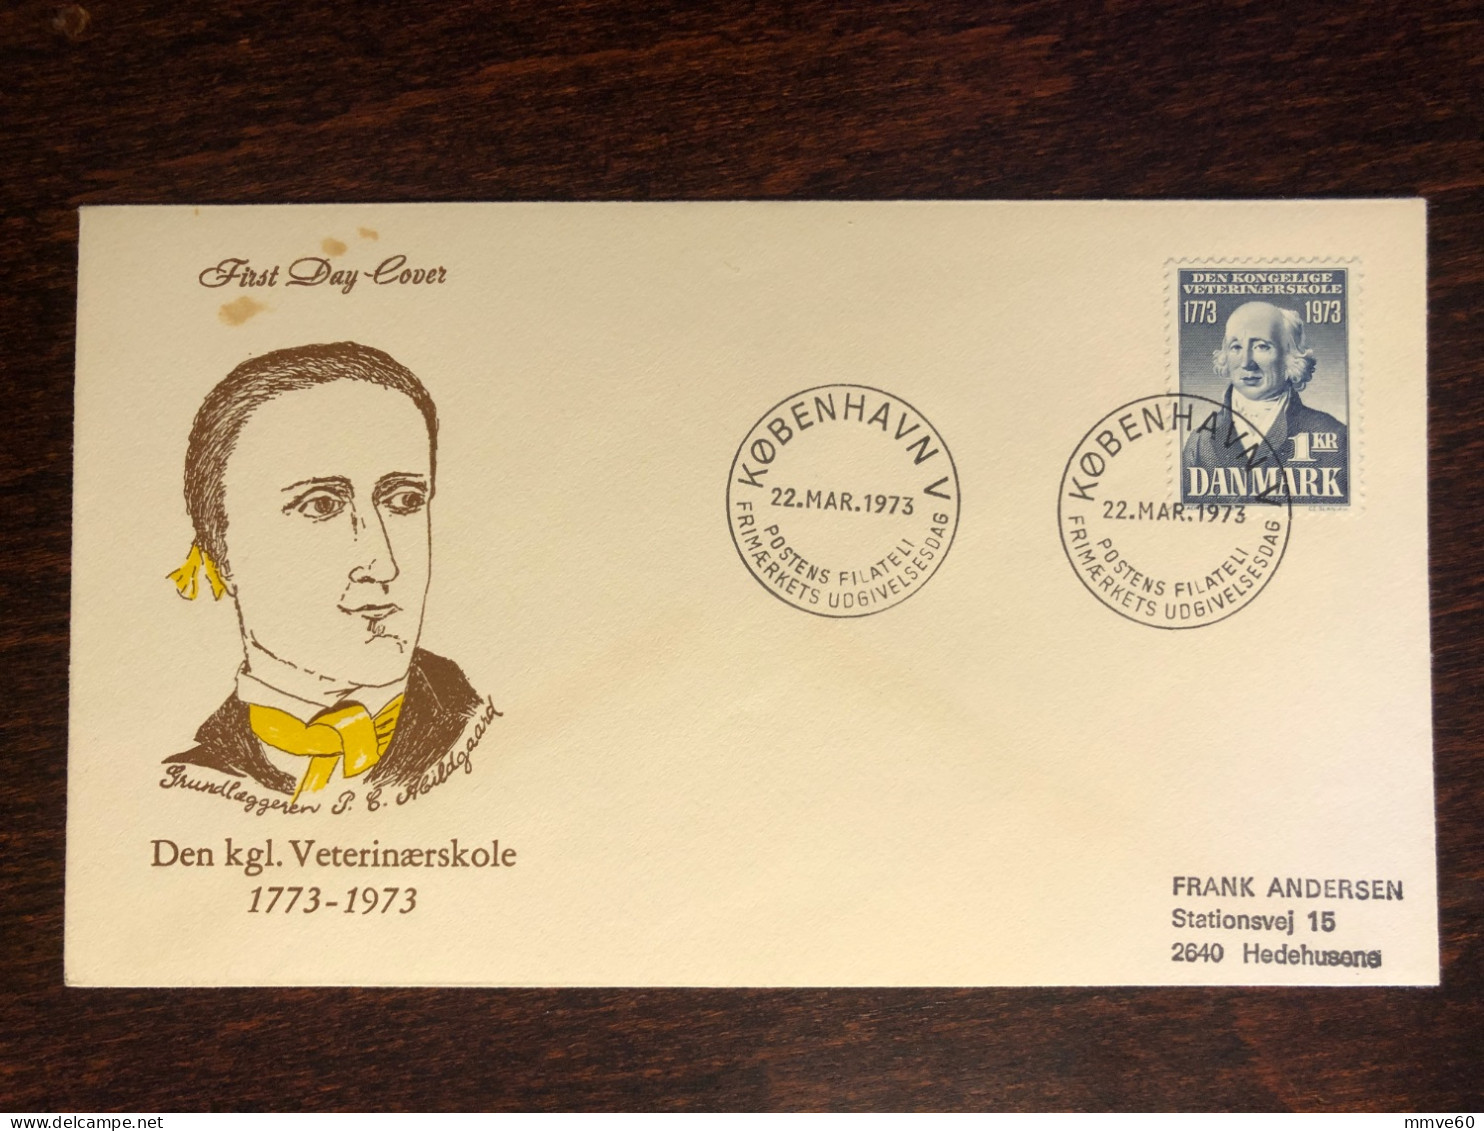 DENMARK FDC COVER 1973 YEAR VETERINARY HEALTH MEDICINE STAMPS - FDC